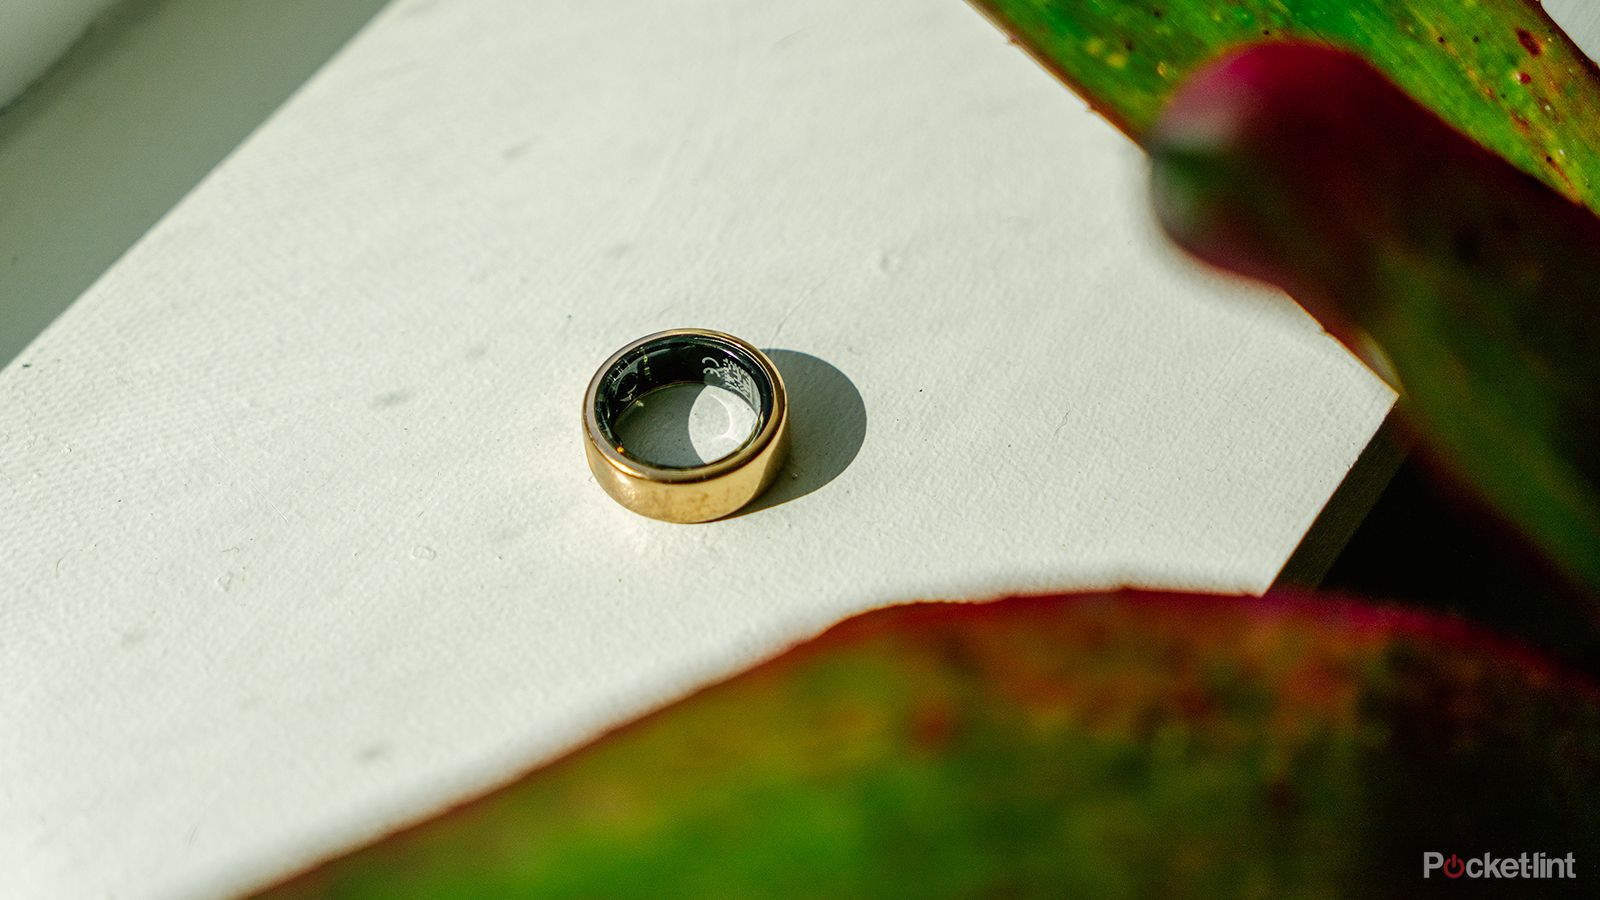 The Oura Ring sits on a white windowsill next to a plant.